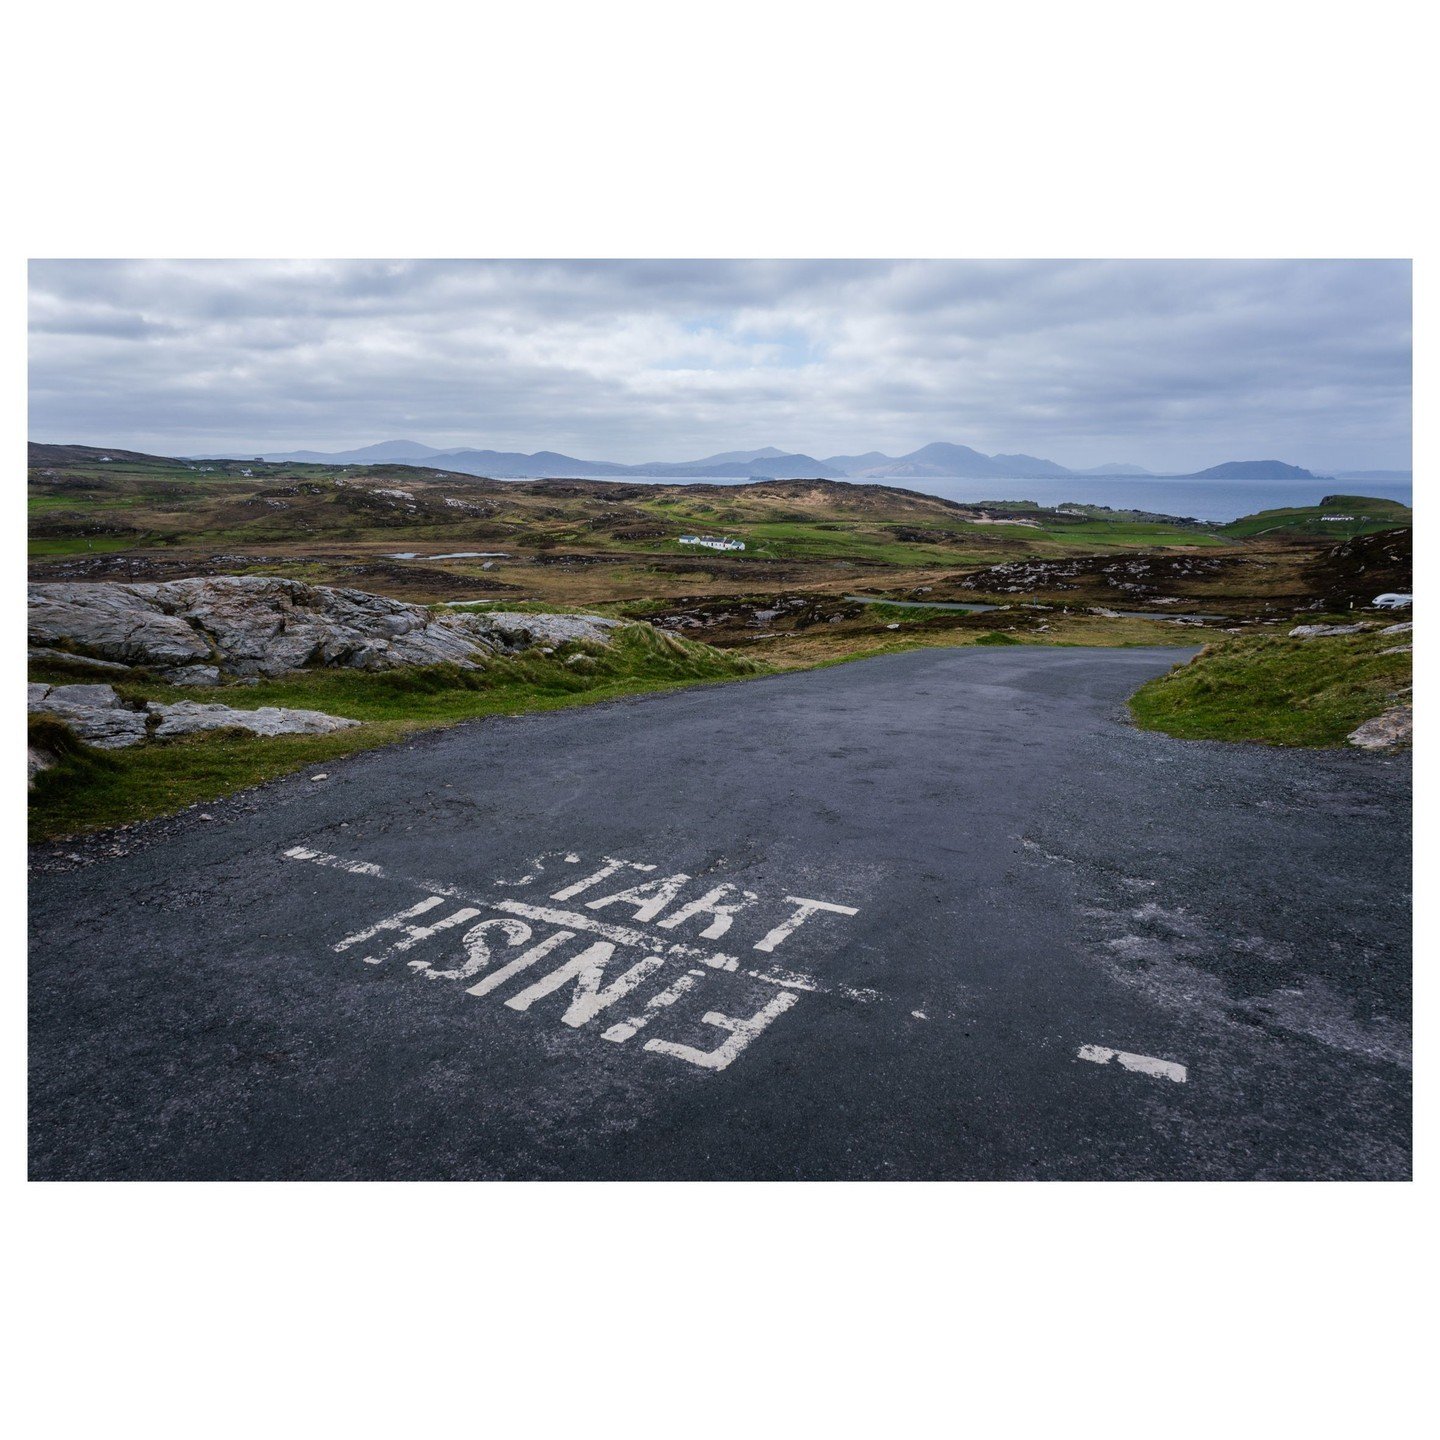 Spent last week on a road trip around the Inishowen peninsula in Donegal. Went to Malin Head and got to see the northern most point in Ireland! also the start and finish line of the Wild Atlantic Way! Will be posting pics from the trip all week so st